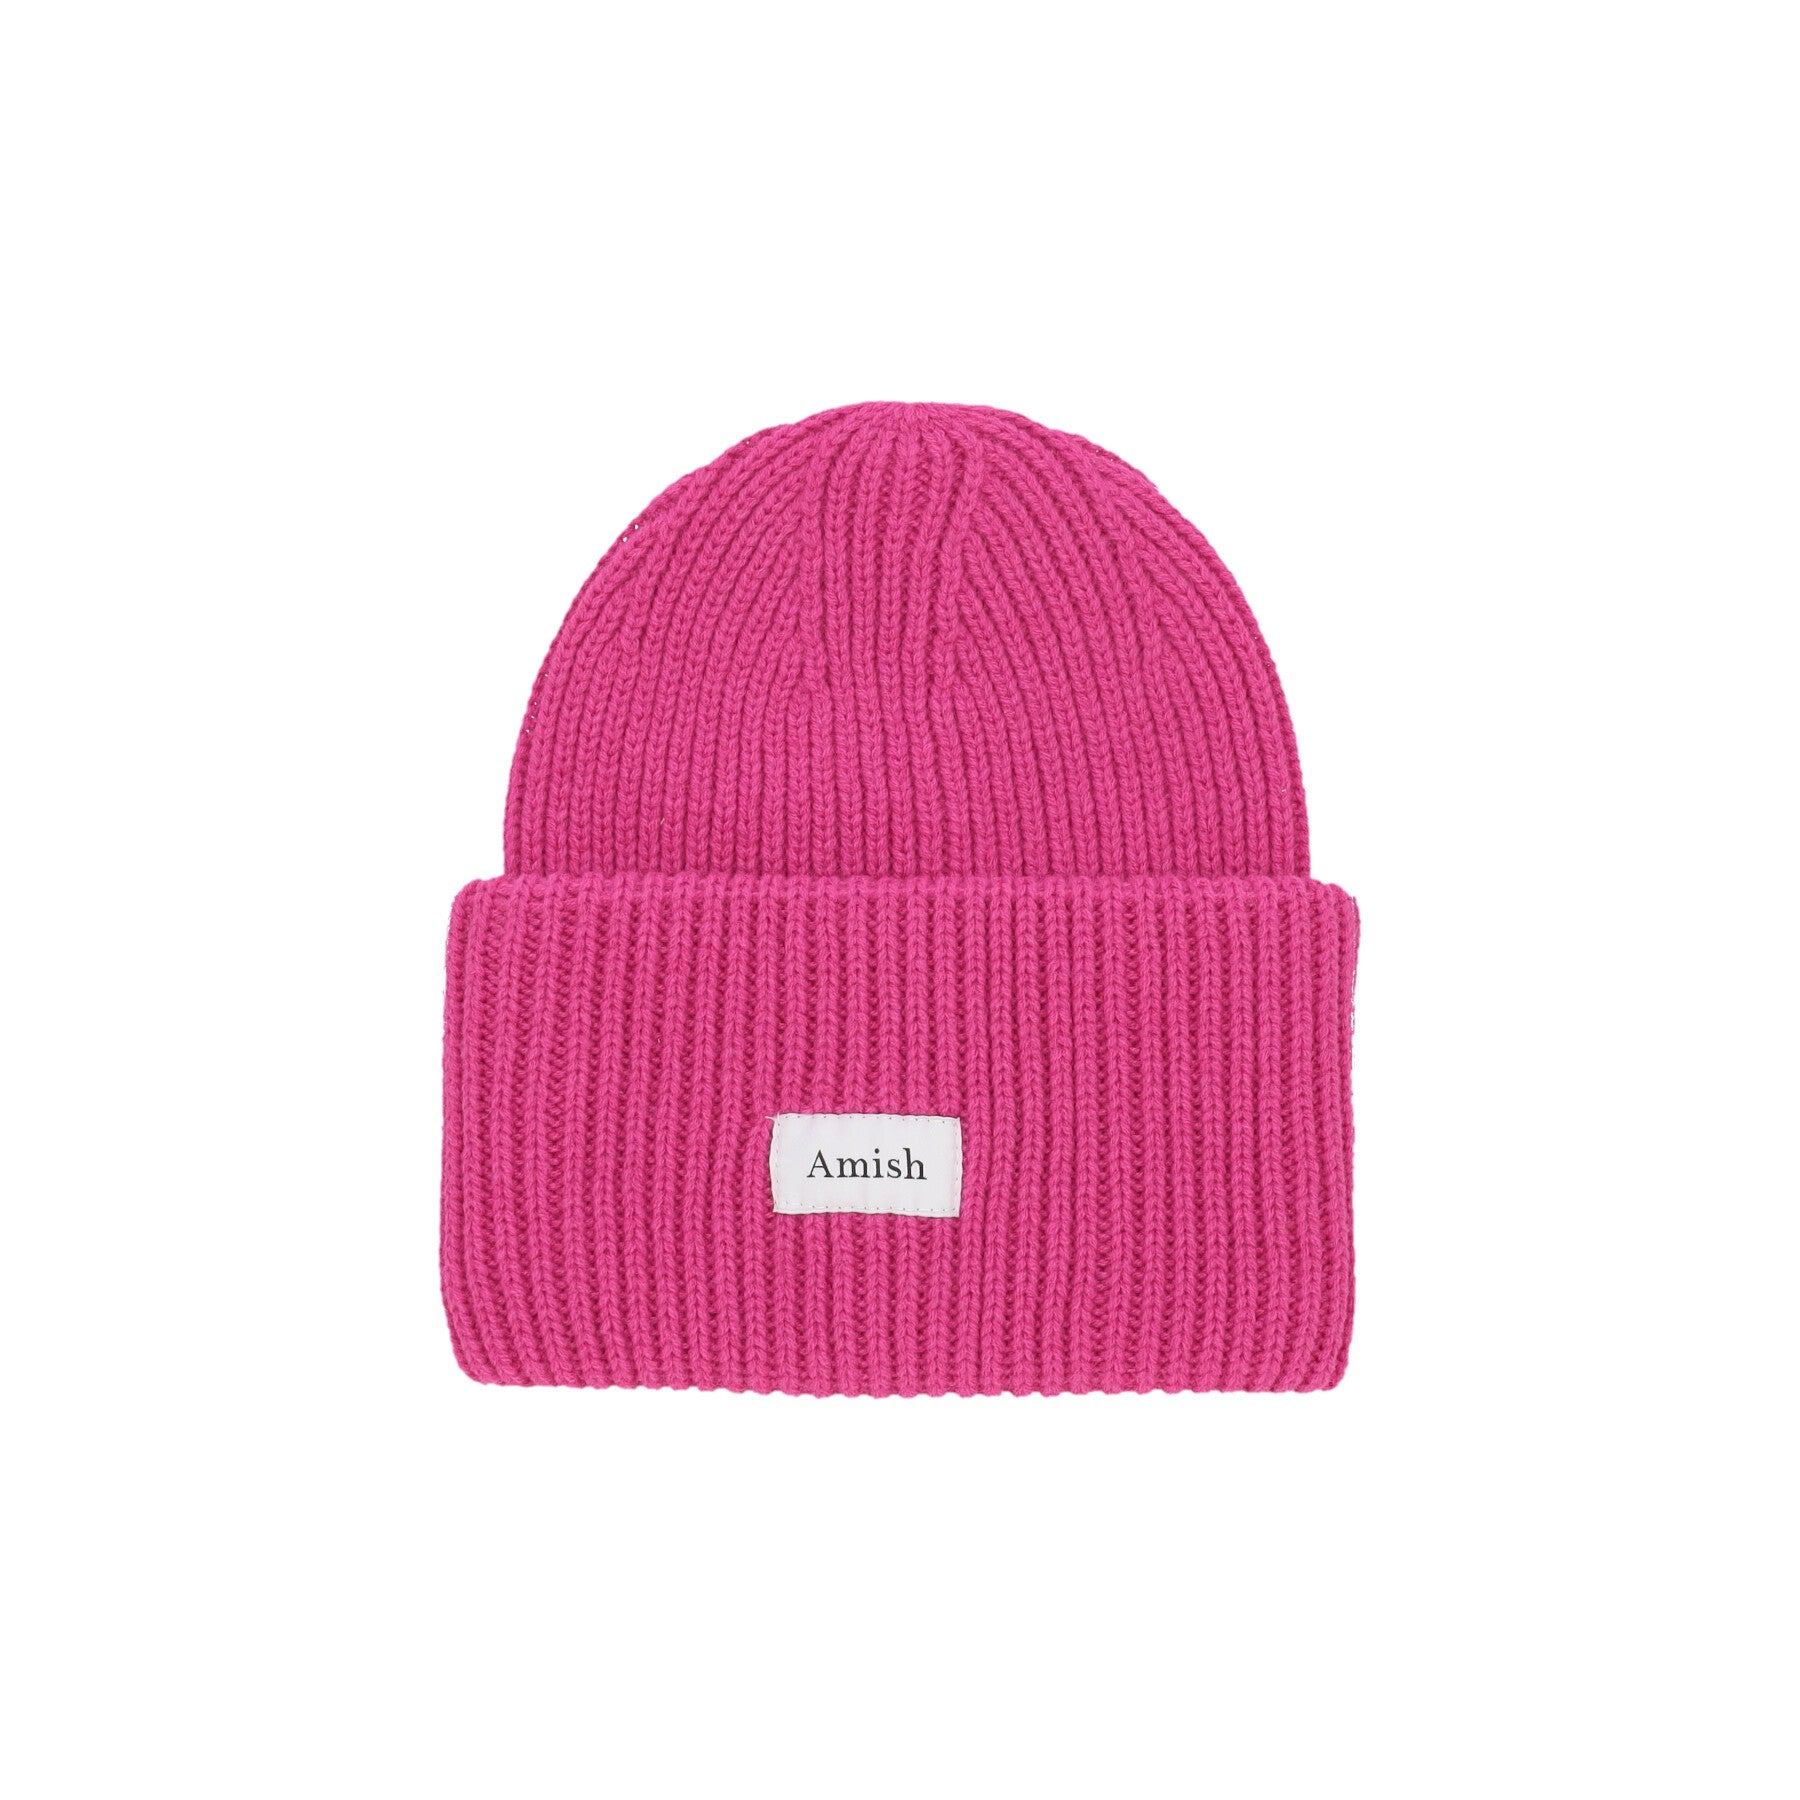 Amish, Cappello Uomo Wool Blend Beanie, Knock Out Pink